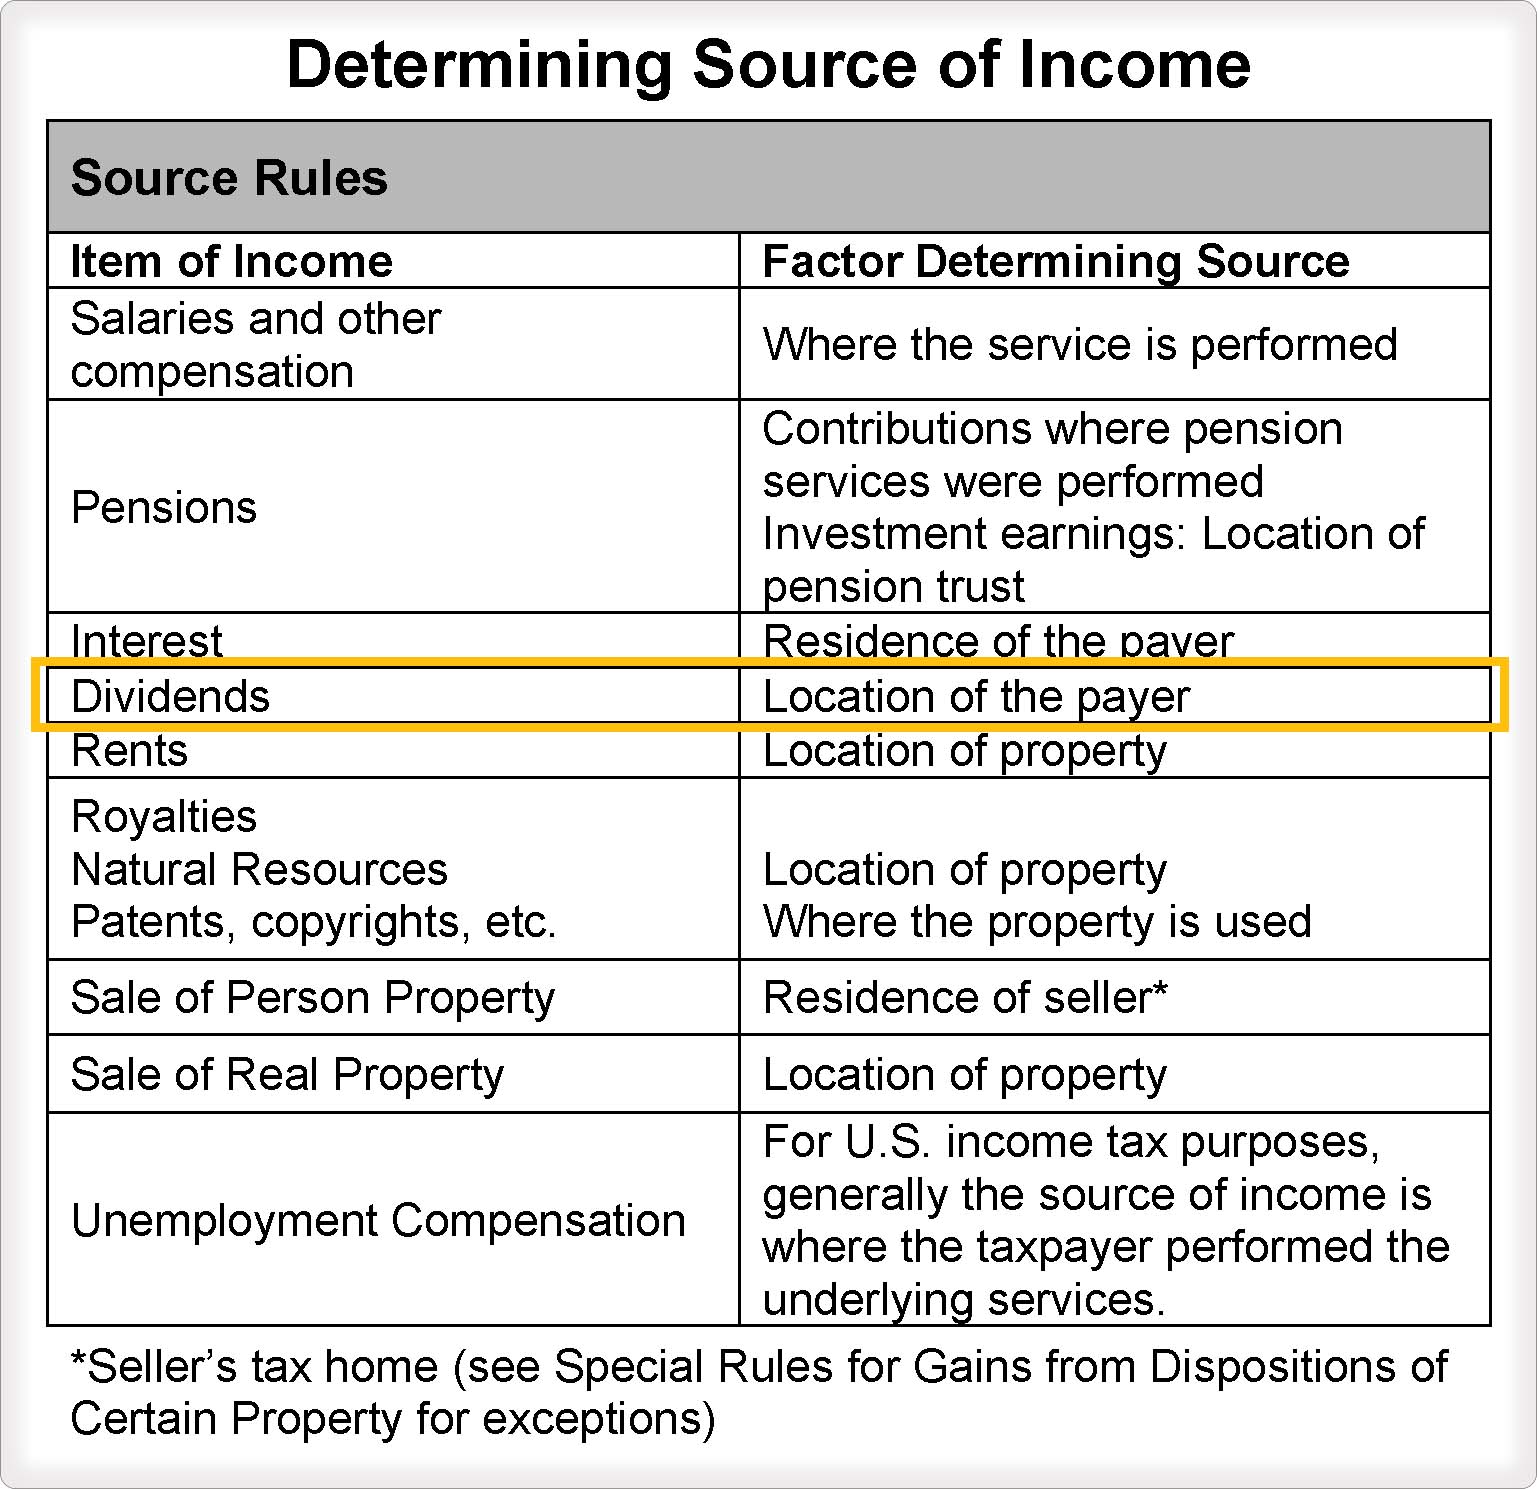 Source Rules table with dividends row highlighted.